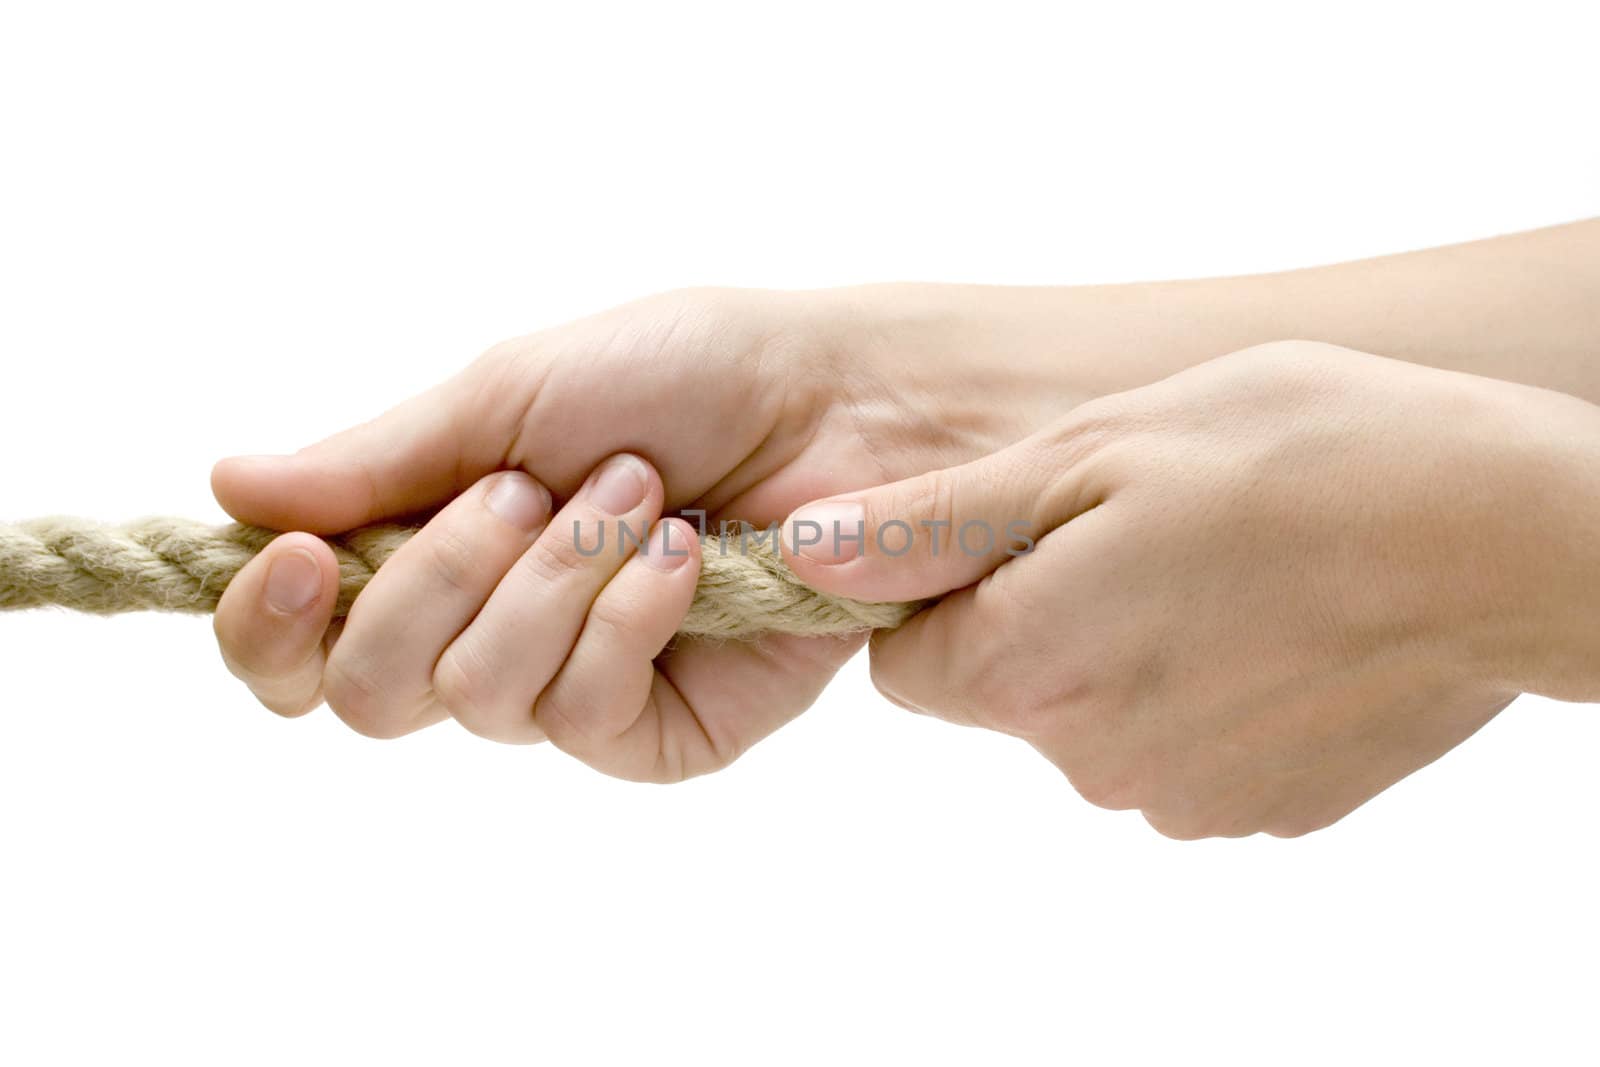 Female hands pulling a rope. Isolated on a white background.